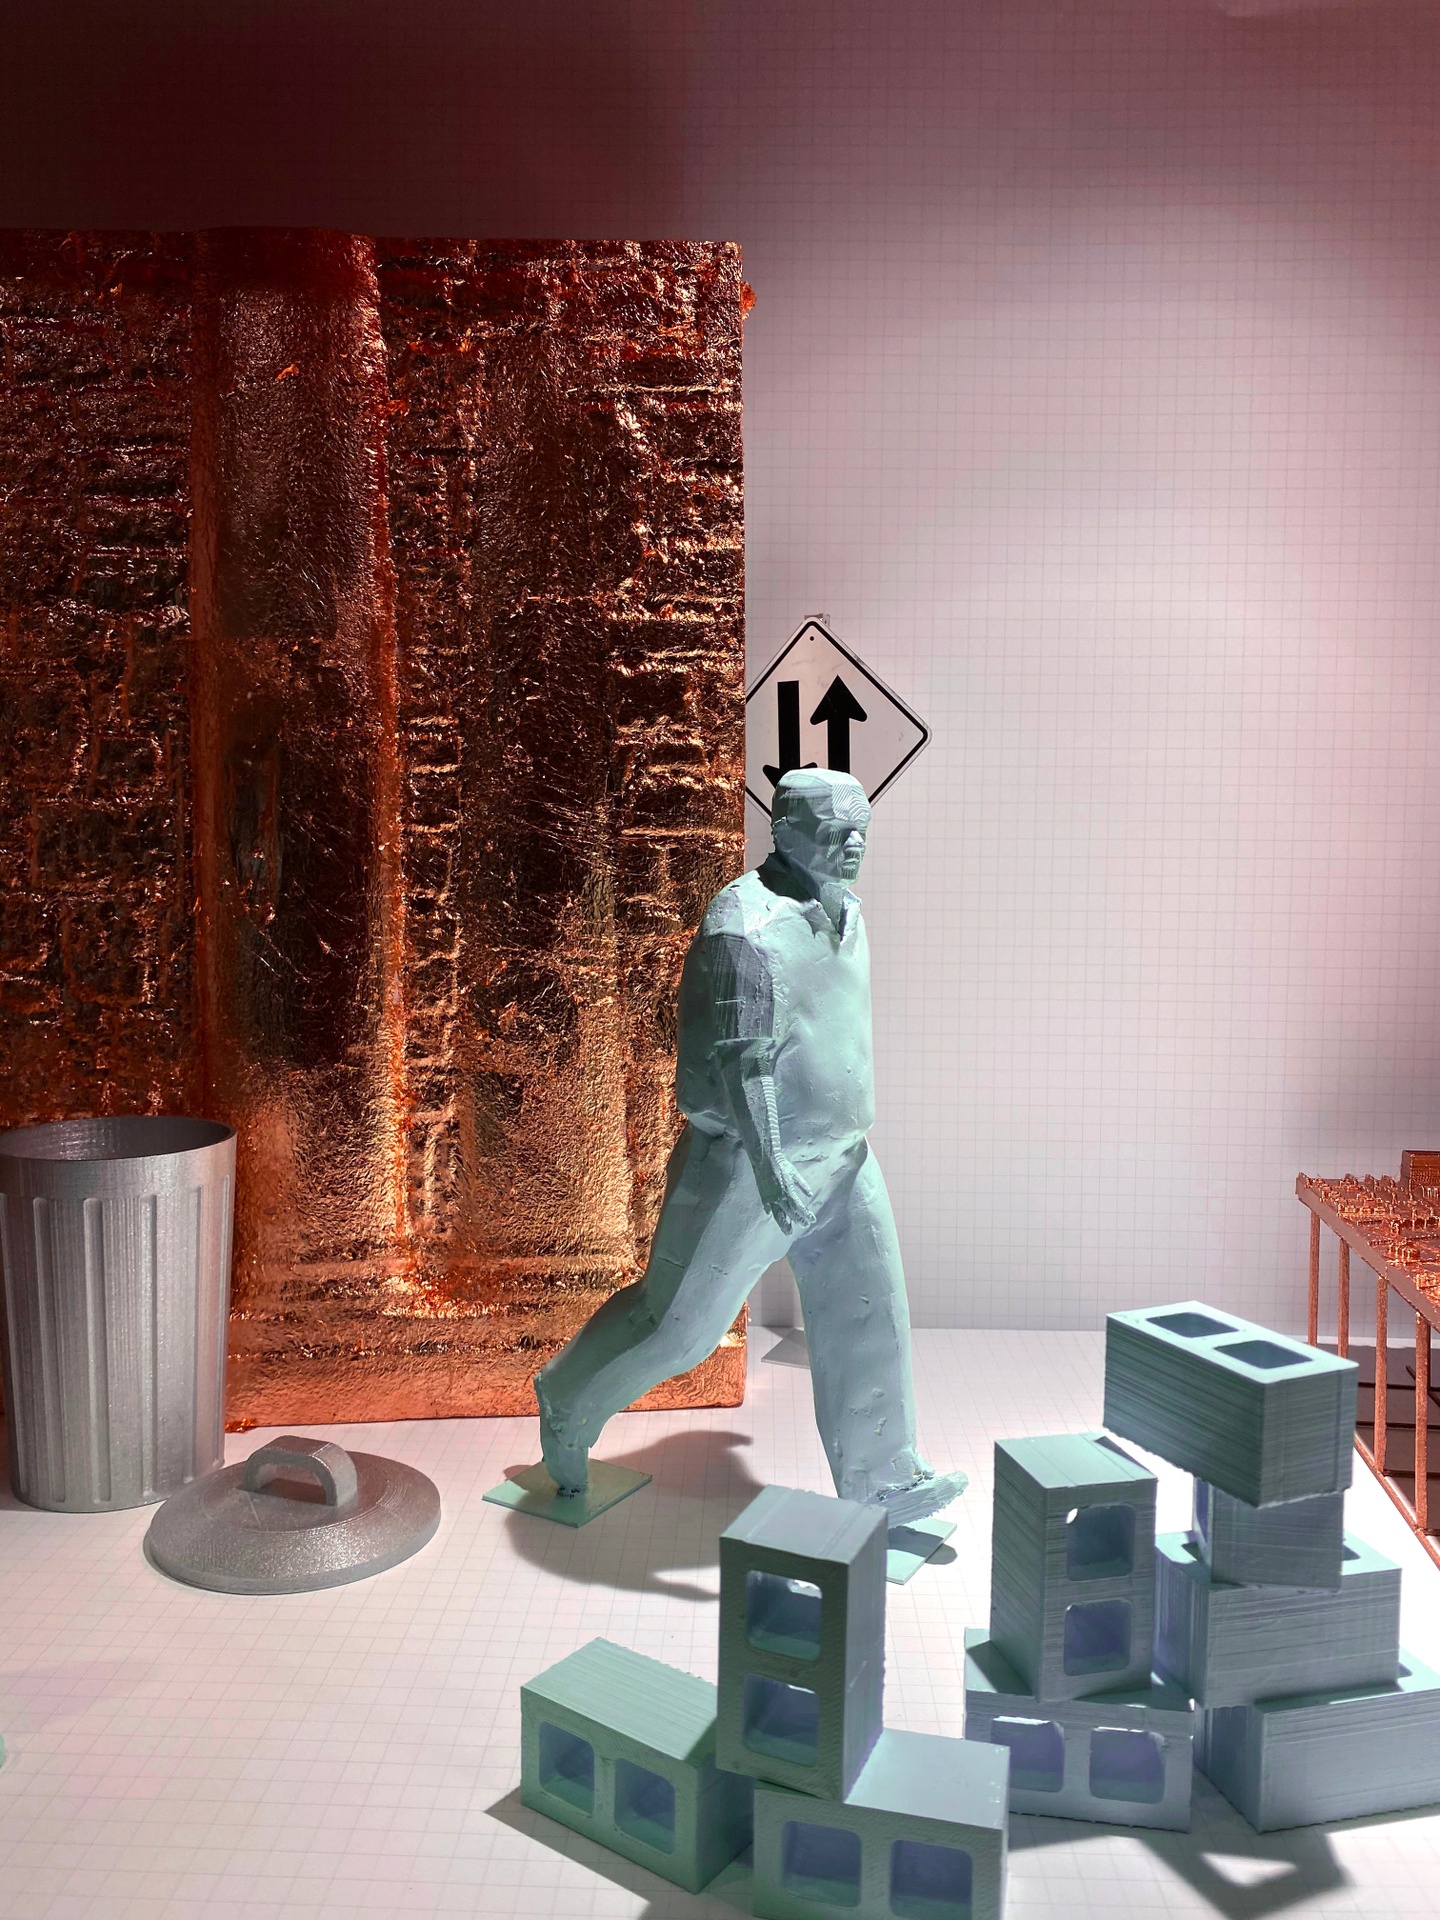 Detail of an architectural model featuring a sculpted figure walking in front of a pile of cinder blocks, with a trash can and part of a wall behind the figure.